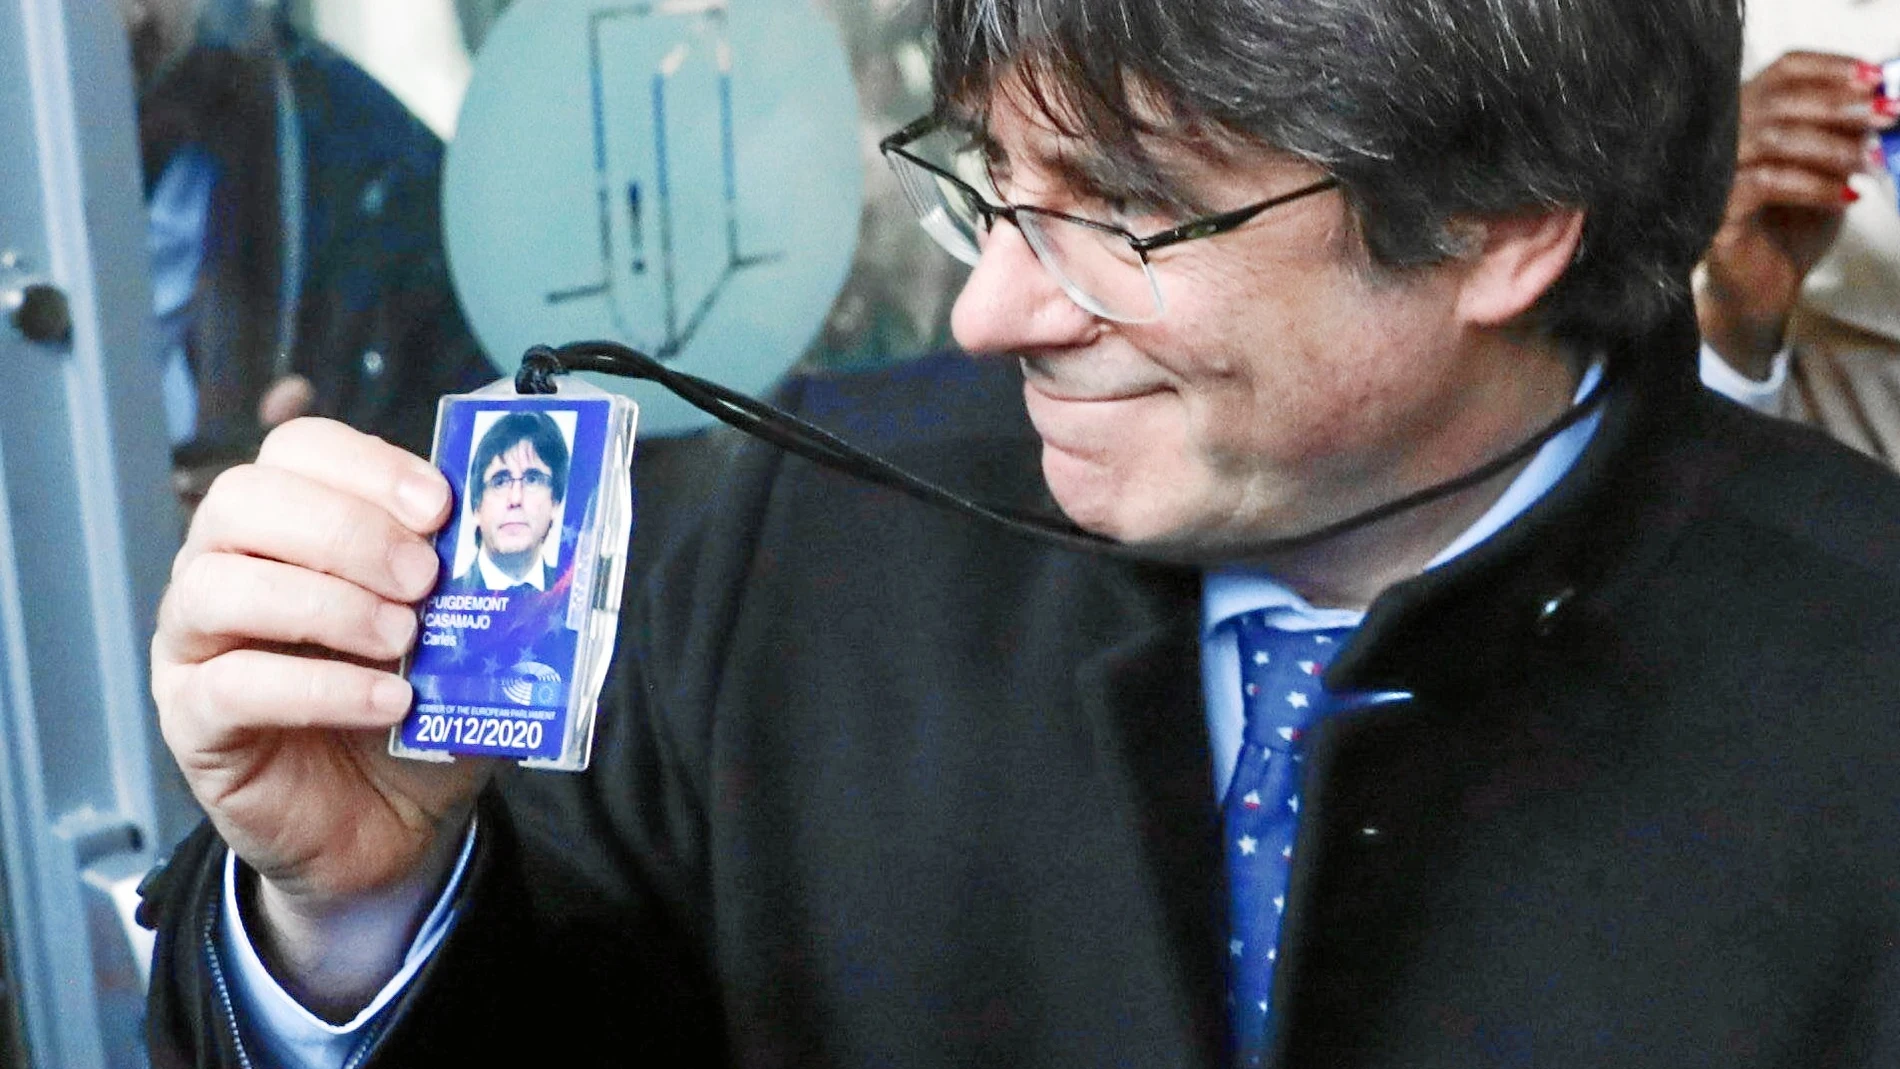 Brussels (Belgium), 20/12/2019.- Former Catalan leader Carles Puigdemont (L) departs from the accreditation center of the European Parliament after the decision of the European Court of Justice in Brussels, Belgium, 20 December 2019. The European Court of Justice has ruled on 19 December that Catalan separatist leader Oriol Junqueras has an MEP immunity when he was jailed by the Spanish Supreme Court in October, prompting calls for his immediate release. (Bélgica, Bruselas) EFE/EPA/STEPHANIE LECOCQ